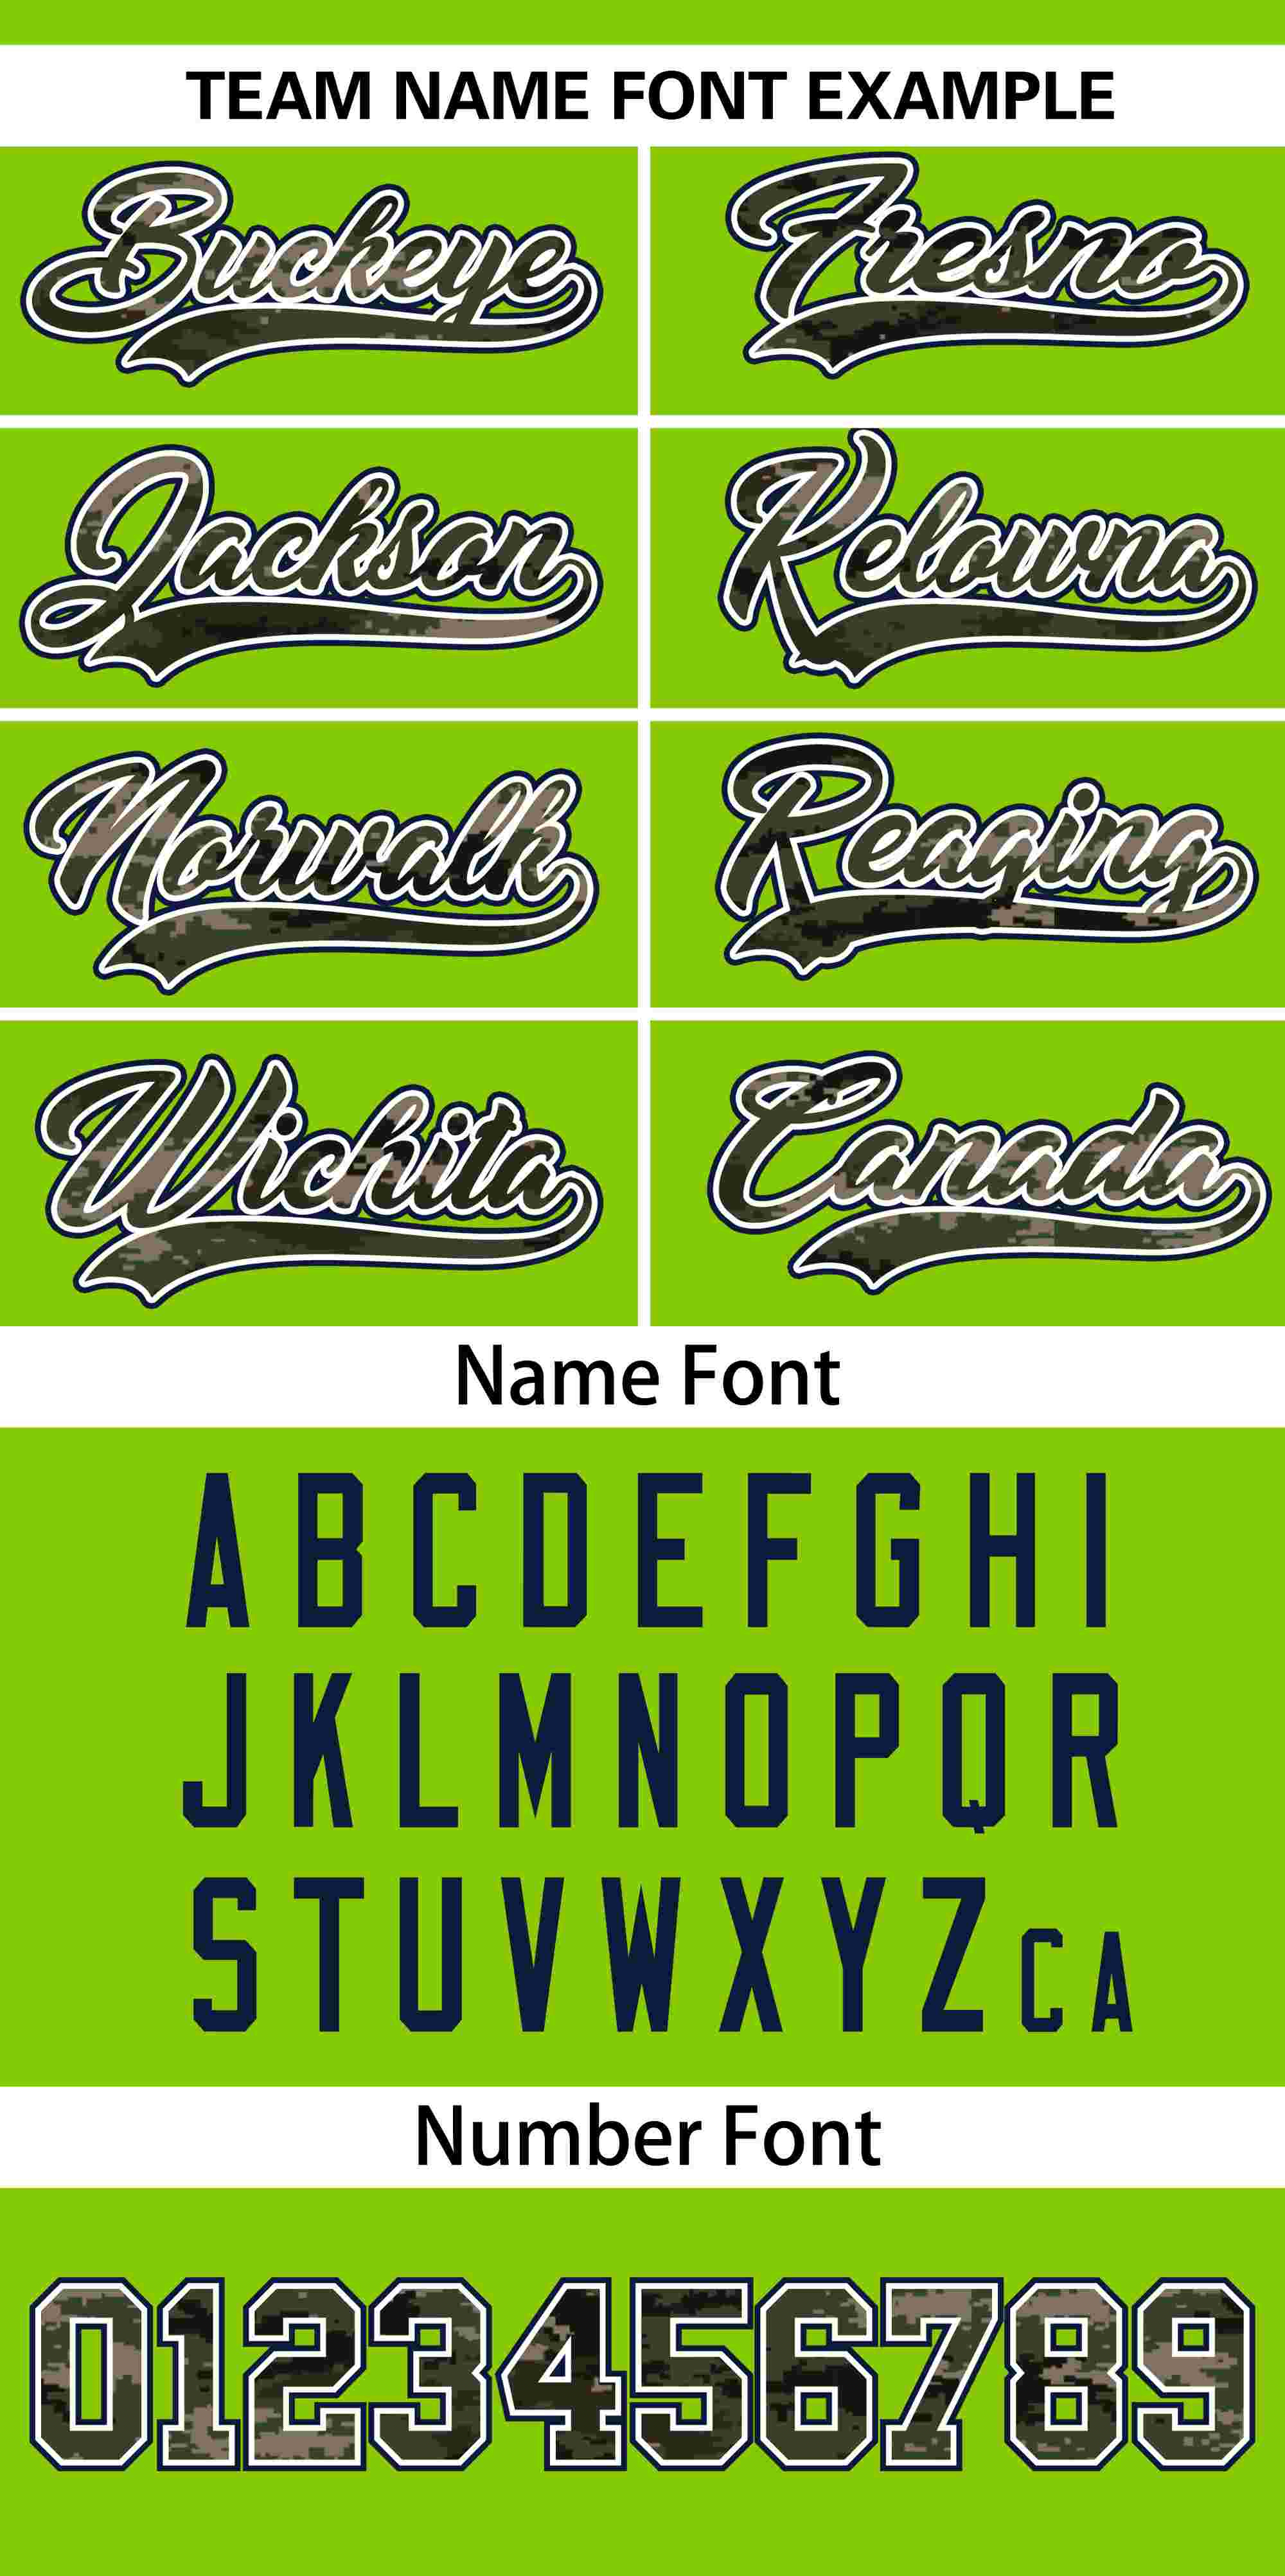 Custom Neon Green Personalized Camo Font Authentic Baseball Jersey